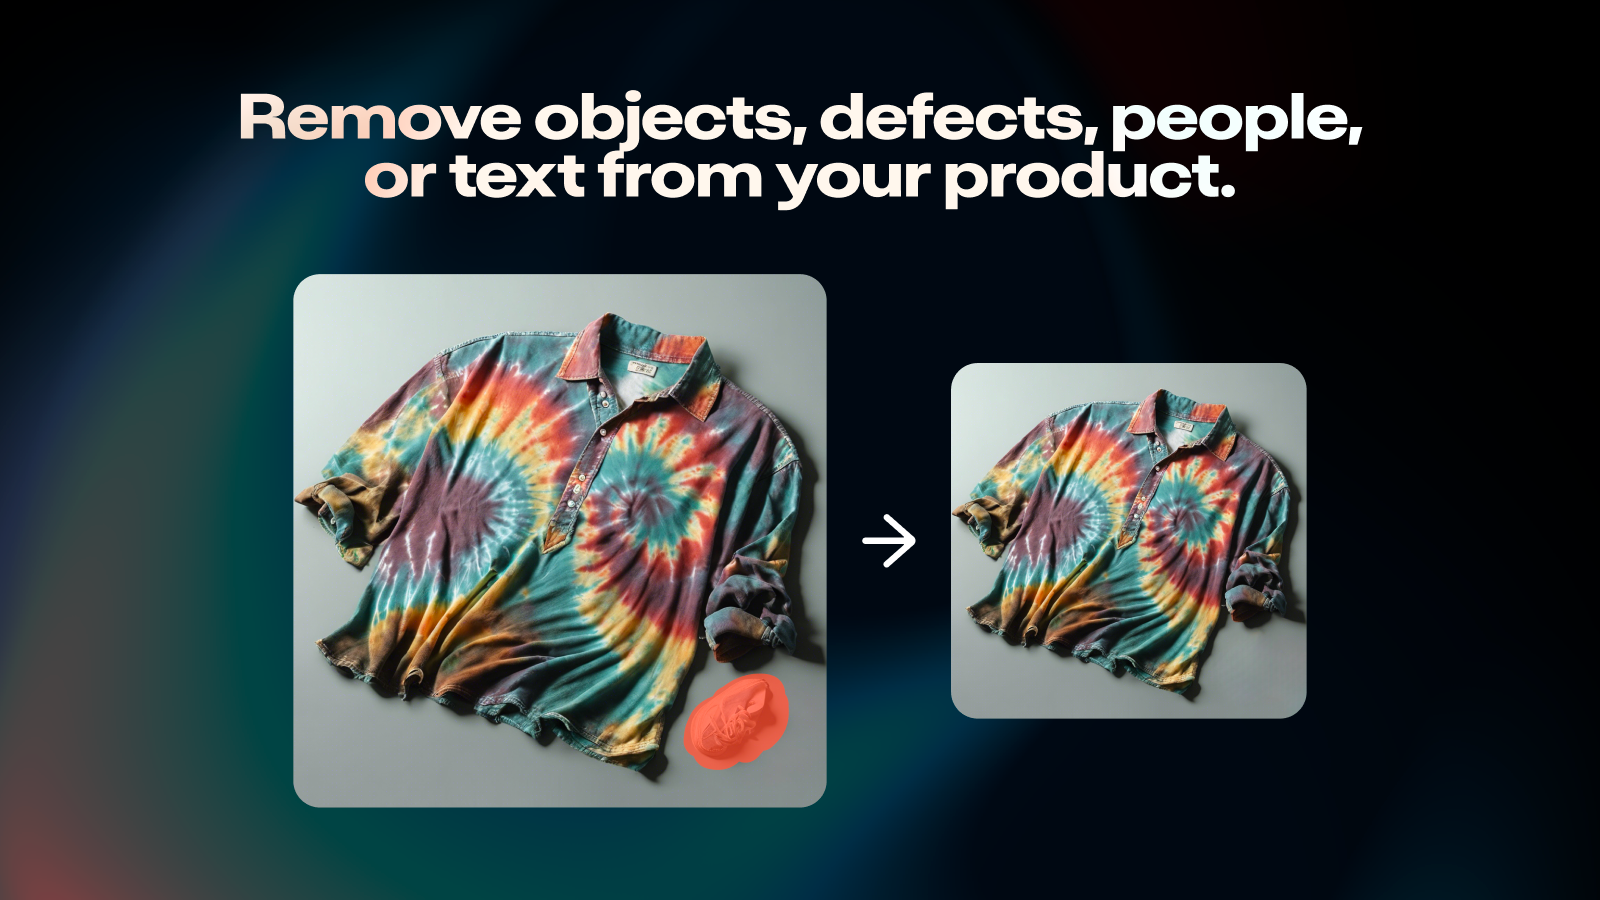 Remove objects, defects, people or text from your creation